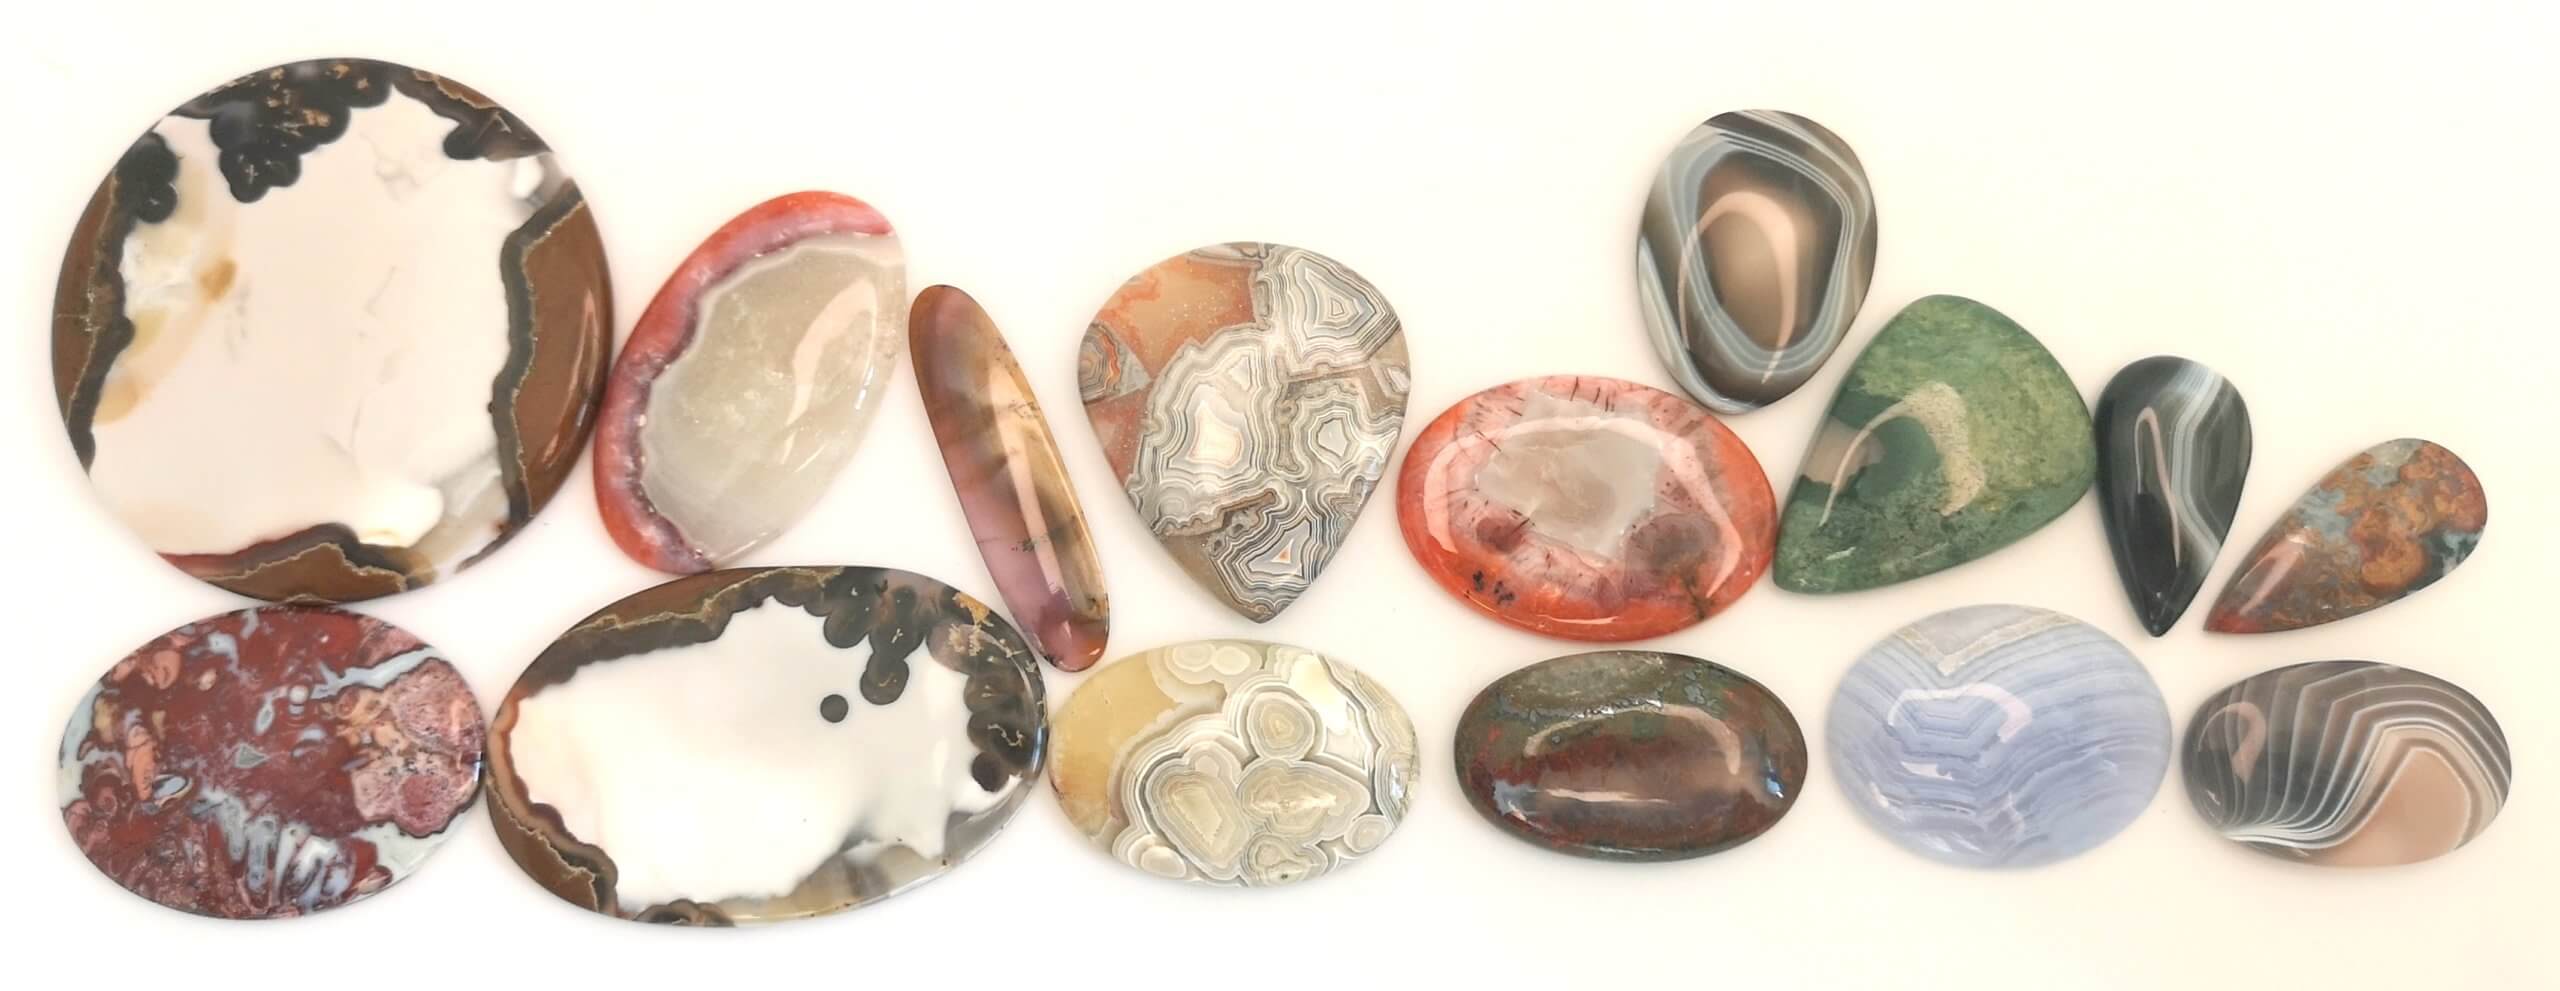 agates healing crystals scaled